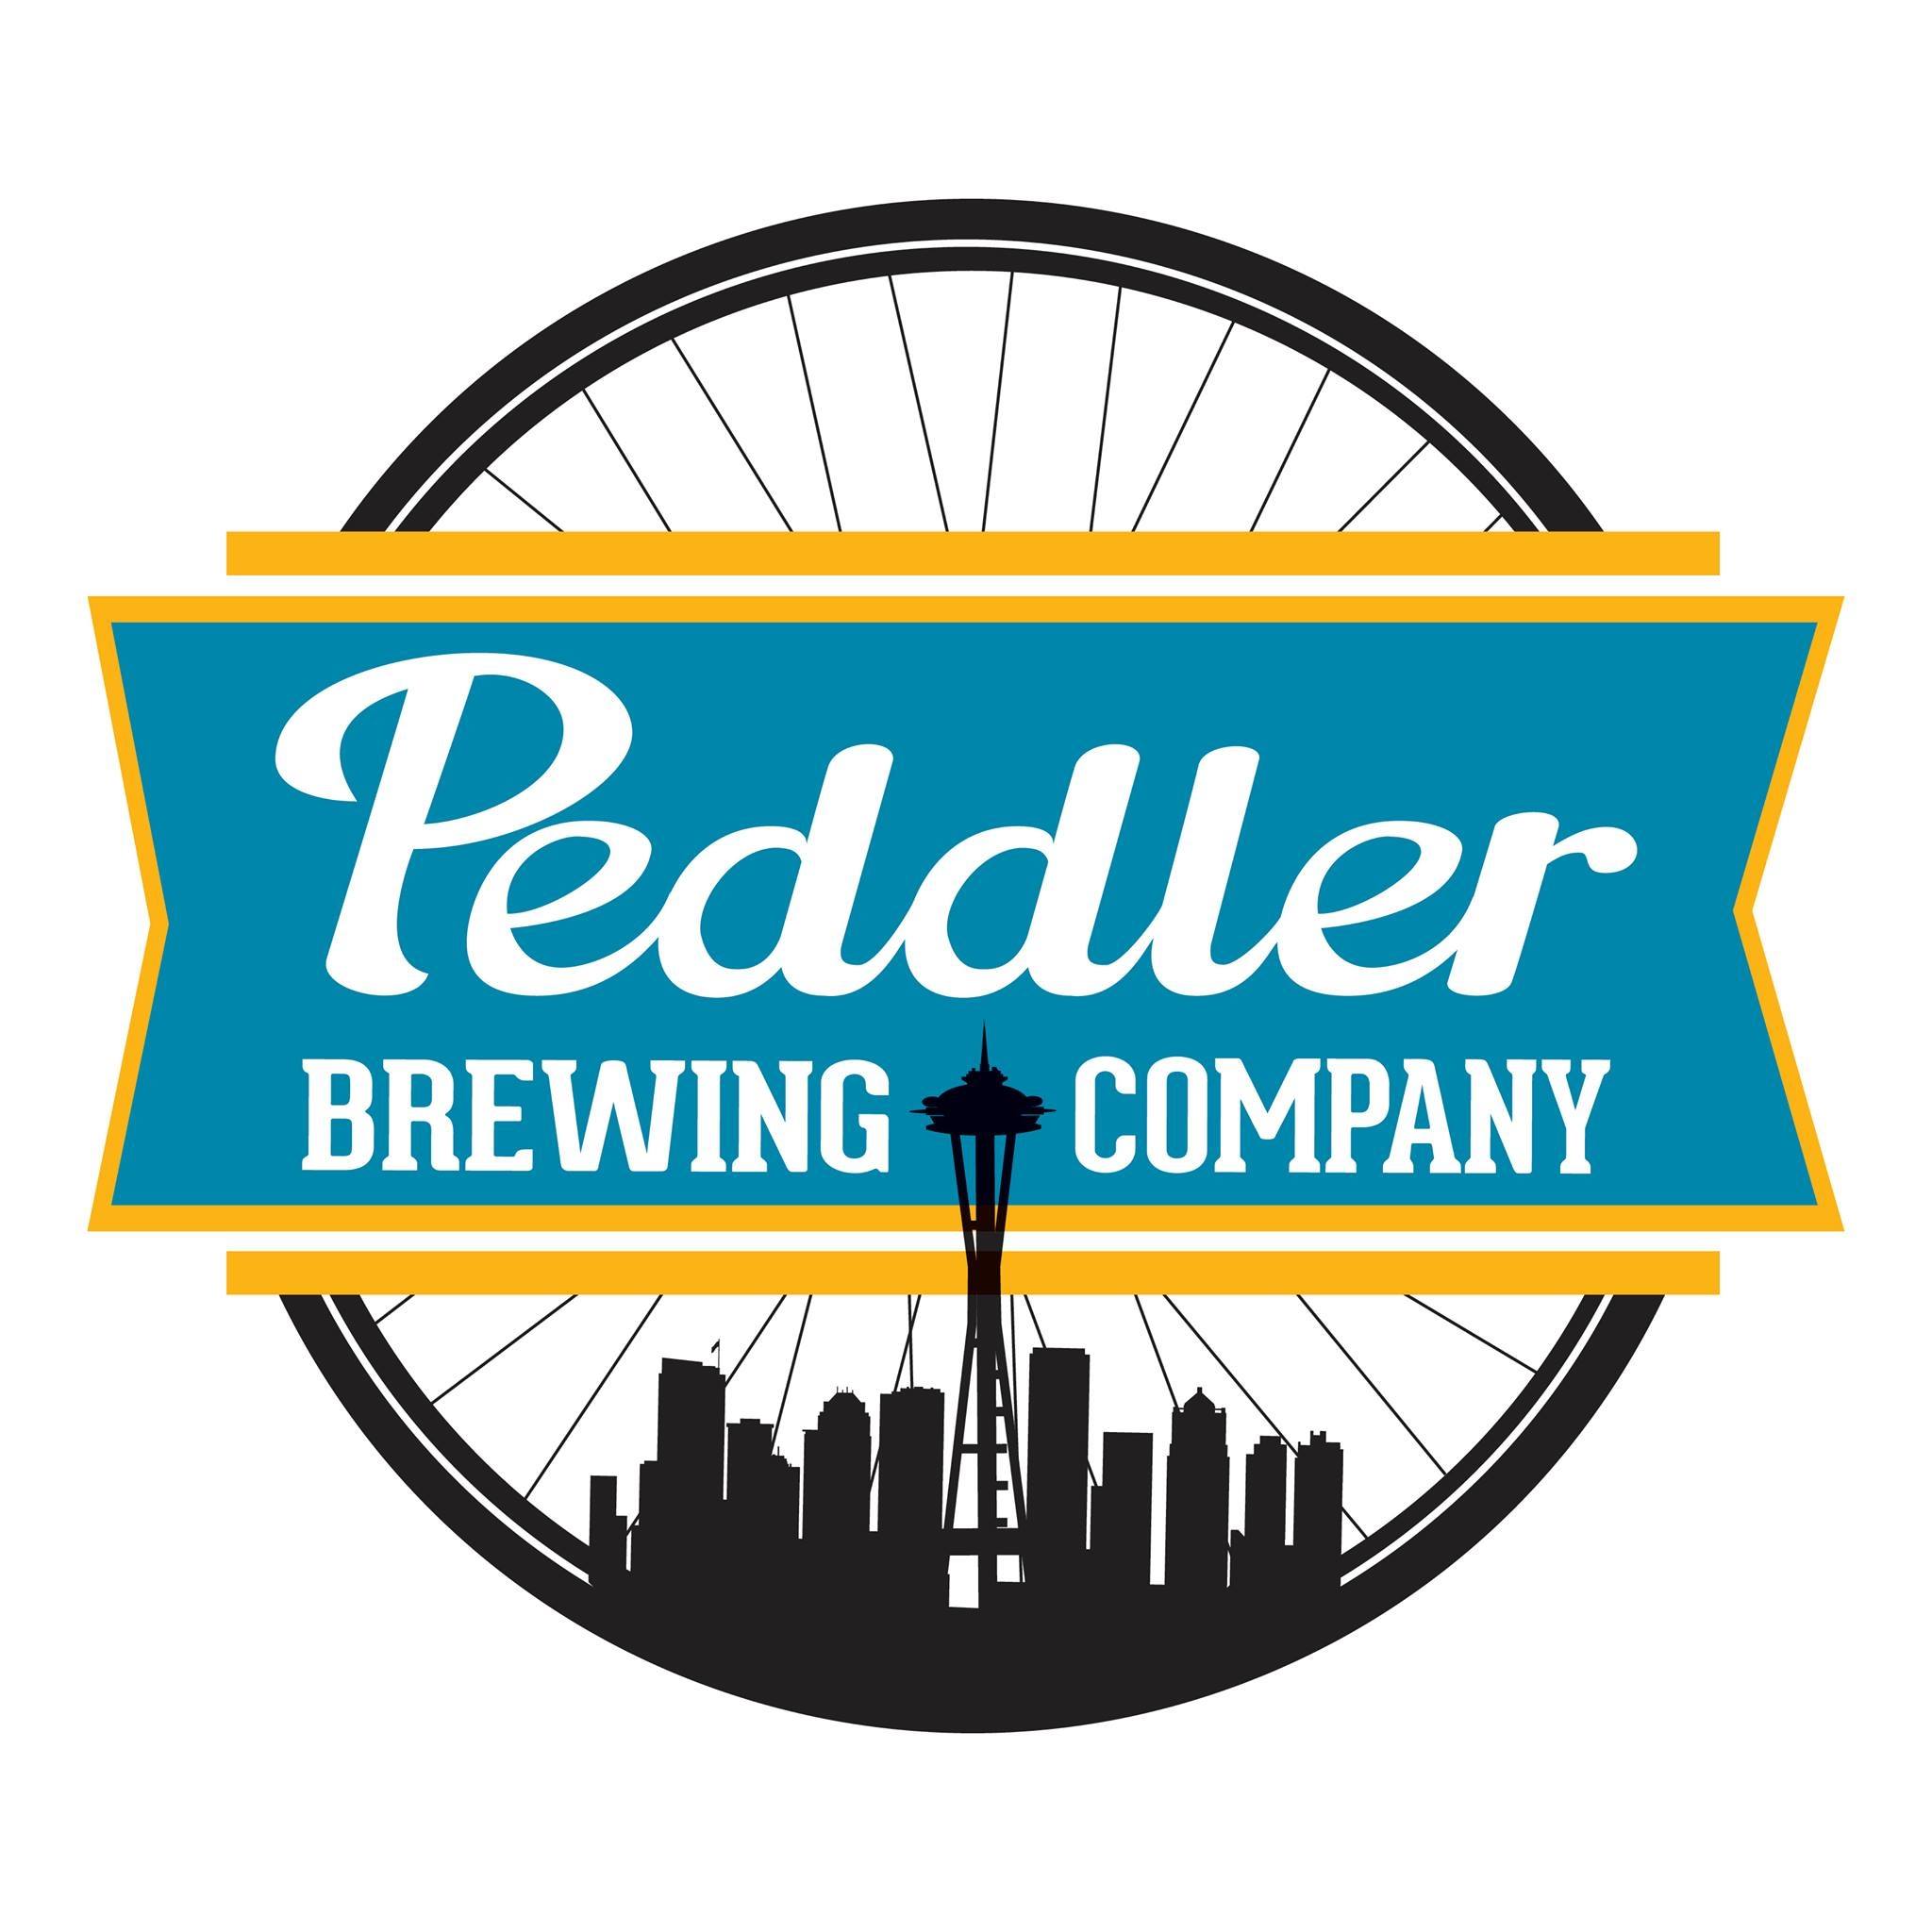 Business logo of Peddler Brewing Company